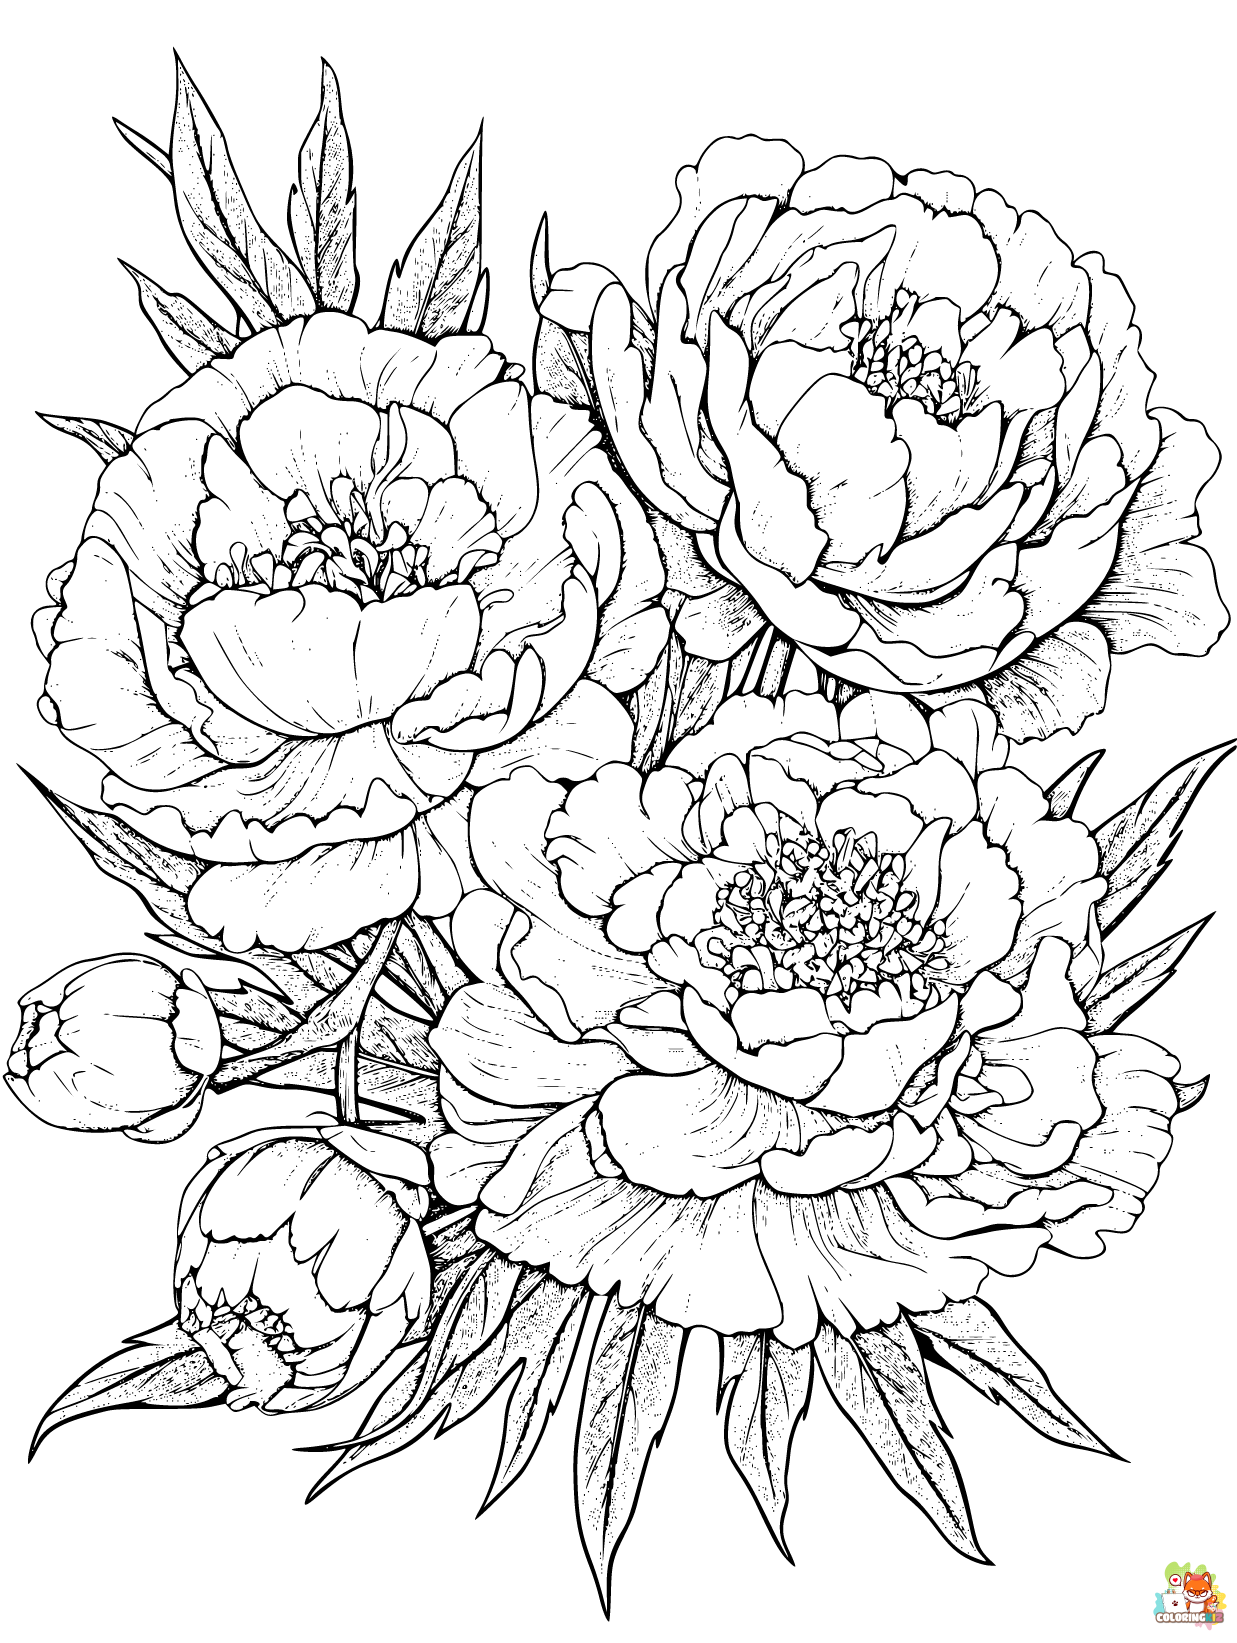 Peonies Coloring Pages 2